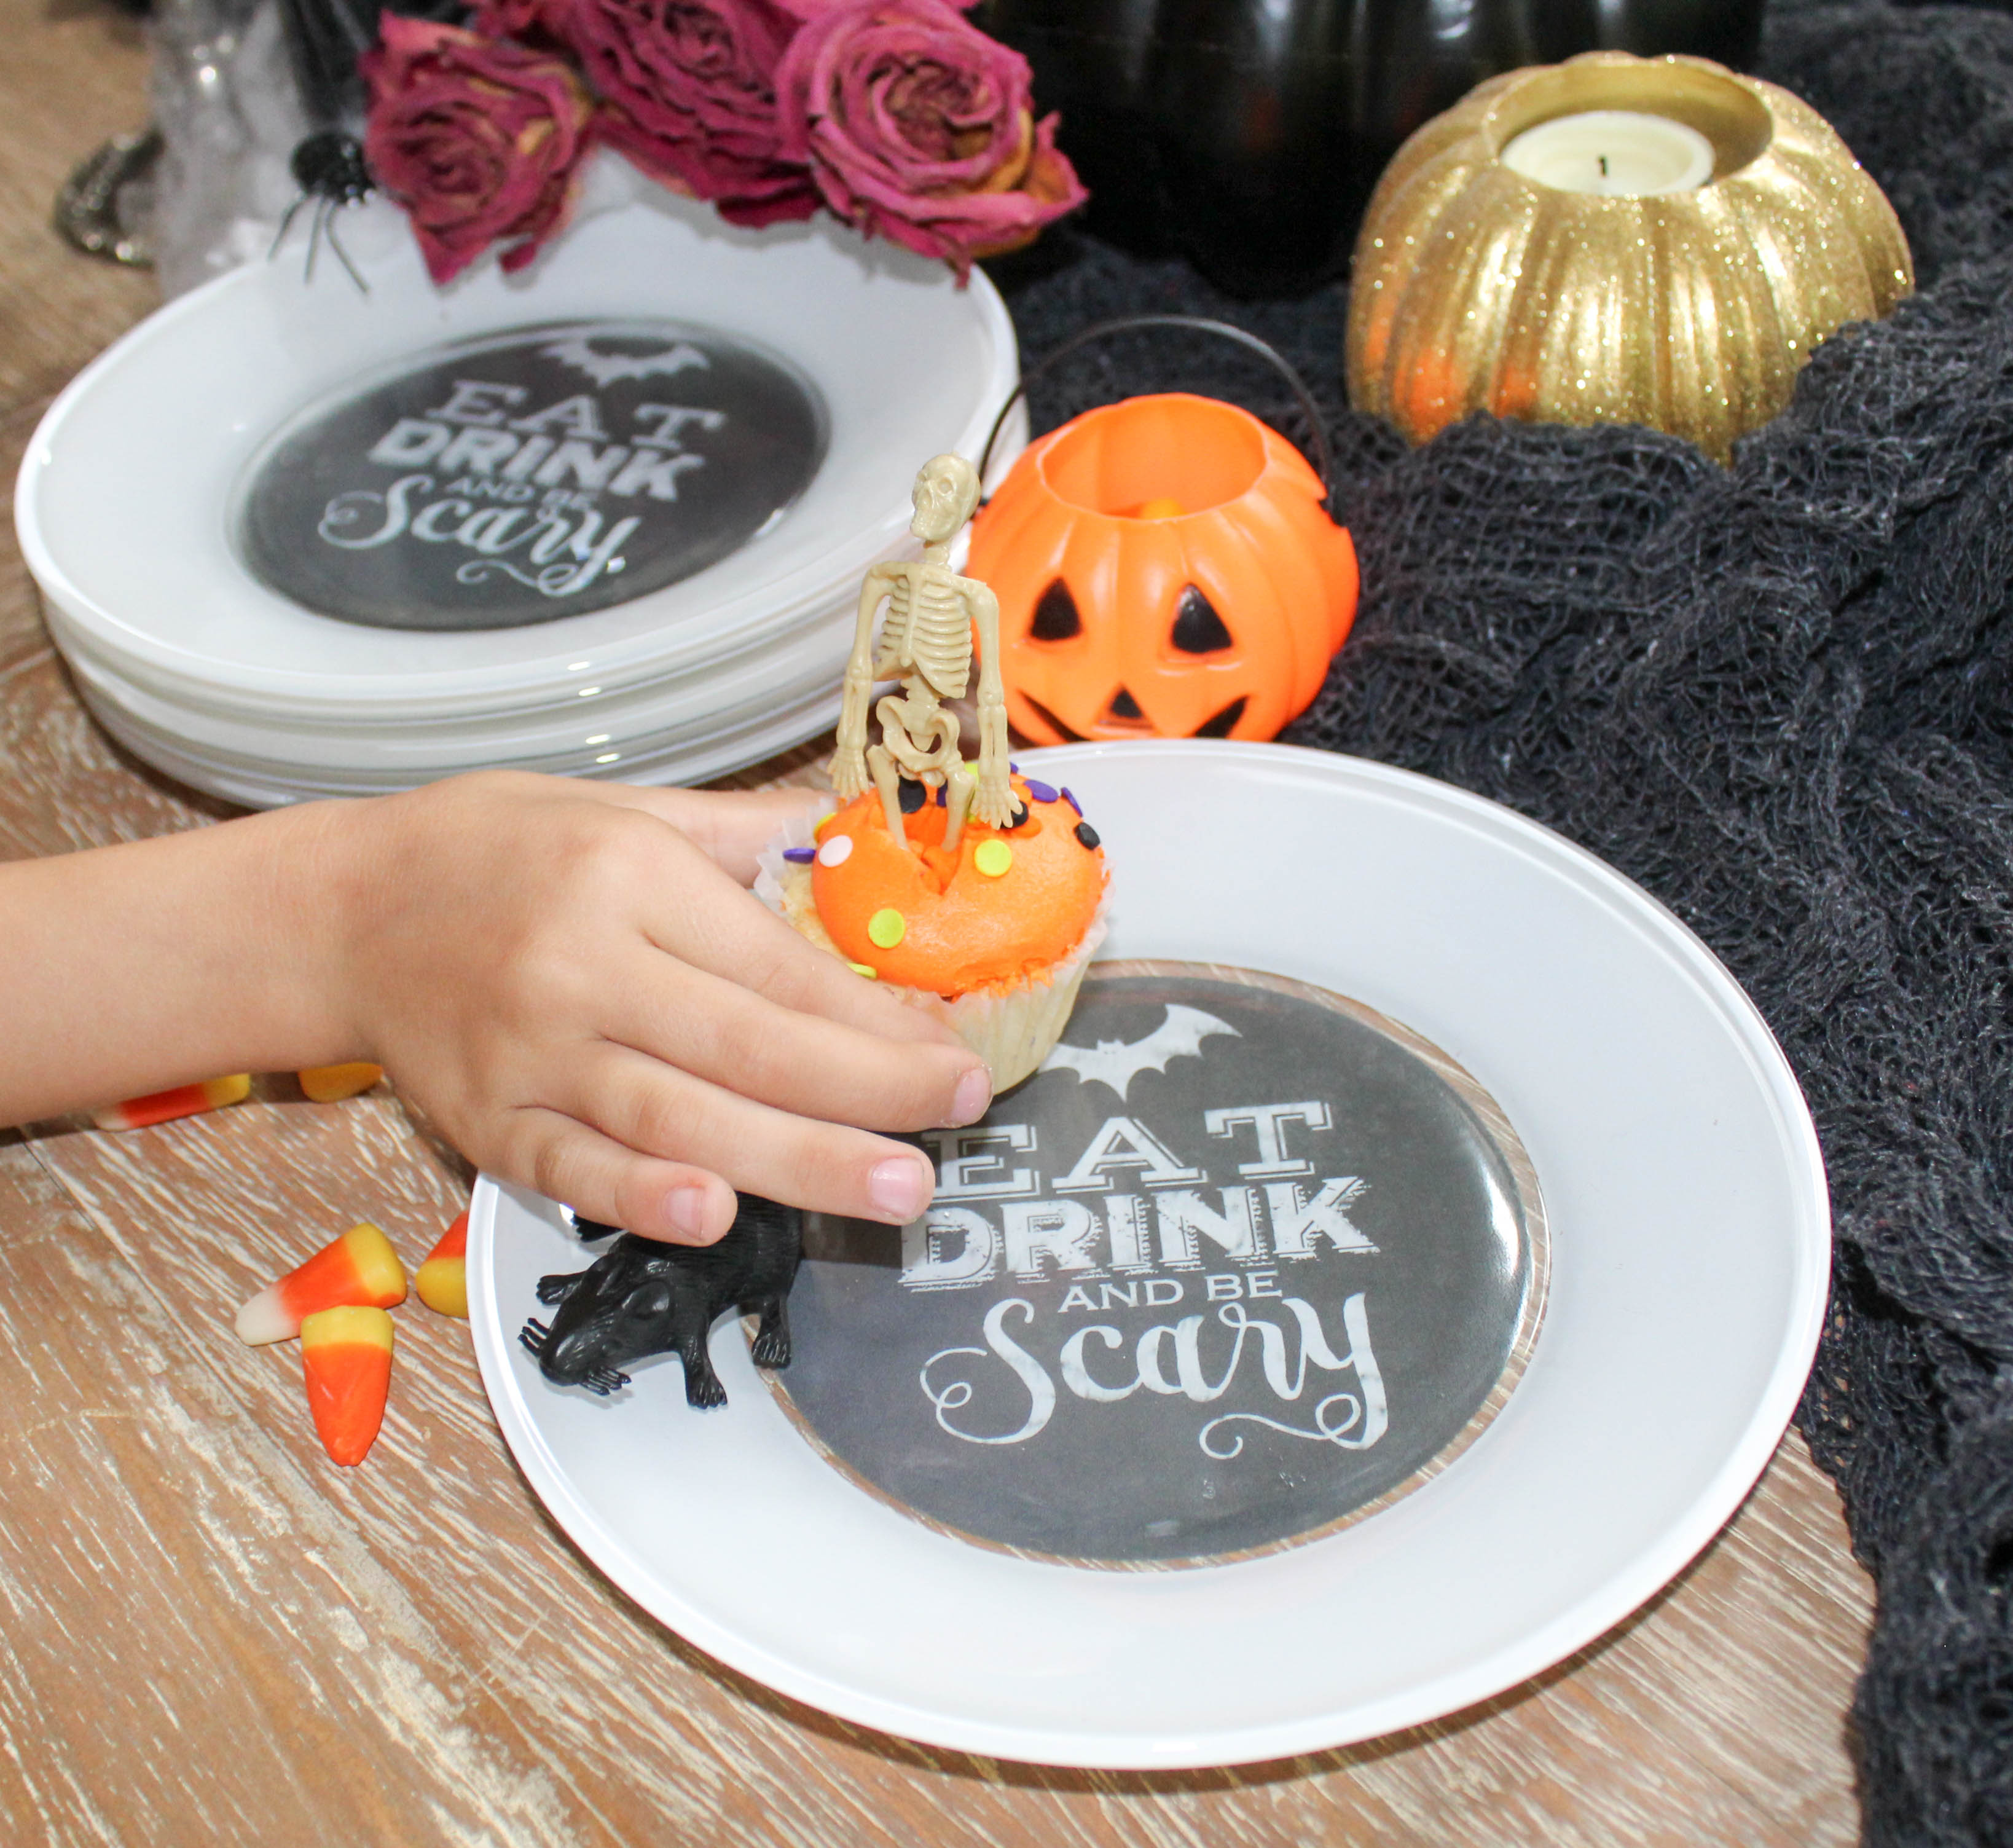 design-your-own-plate-make-custom-plate-halloween-dishes-19